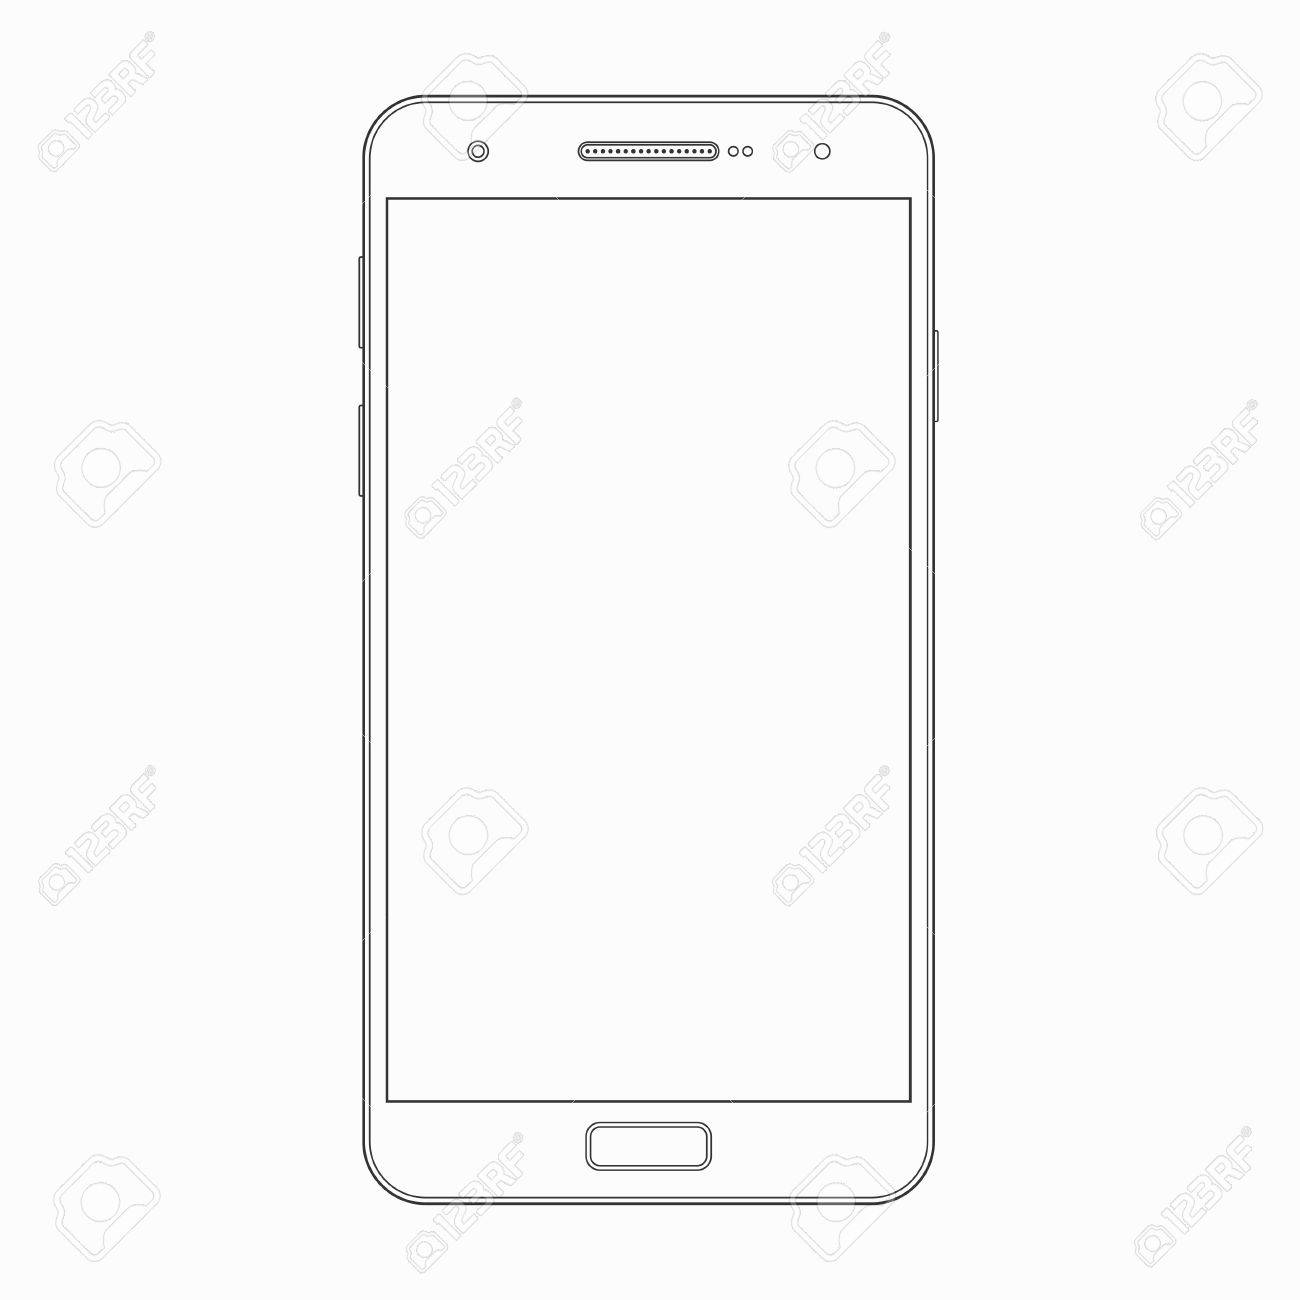 Smartphone Outline Template Vector Wireframe Contour Of Modern Smart Phone Mobile Phone Cellphone Isolated On White Background Blank Screen Mobile Device Gadget Icon Symbol Sign Royalty Free SVG Cliparts Vectors And Stock